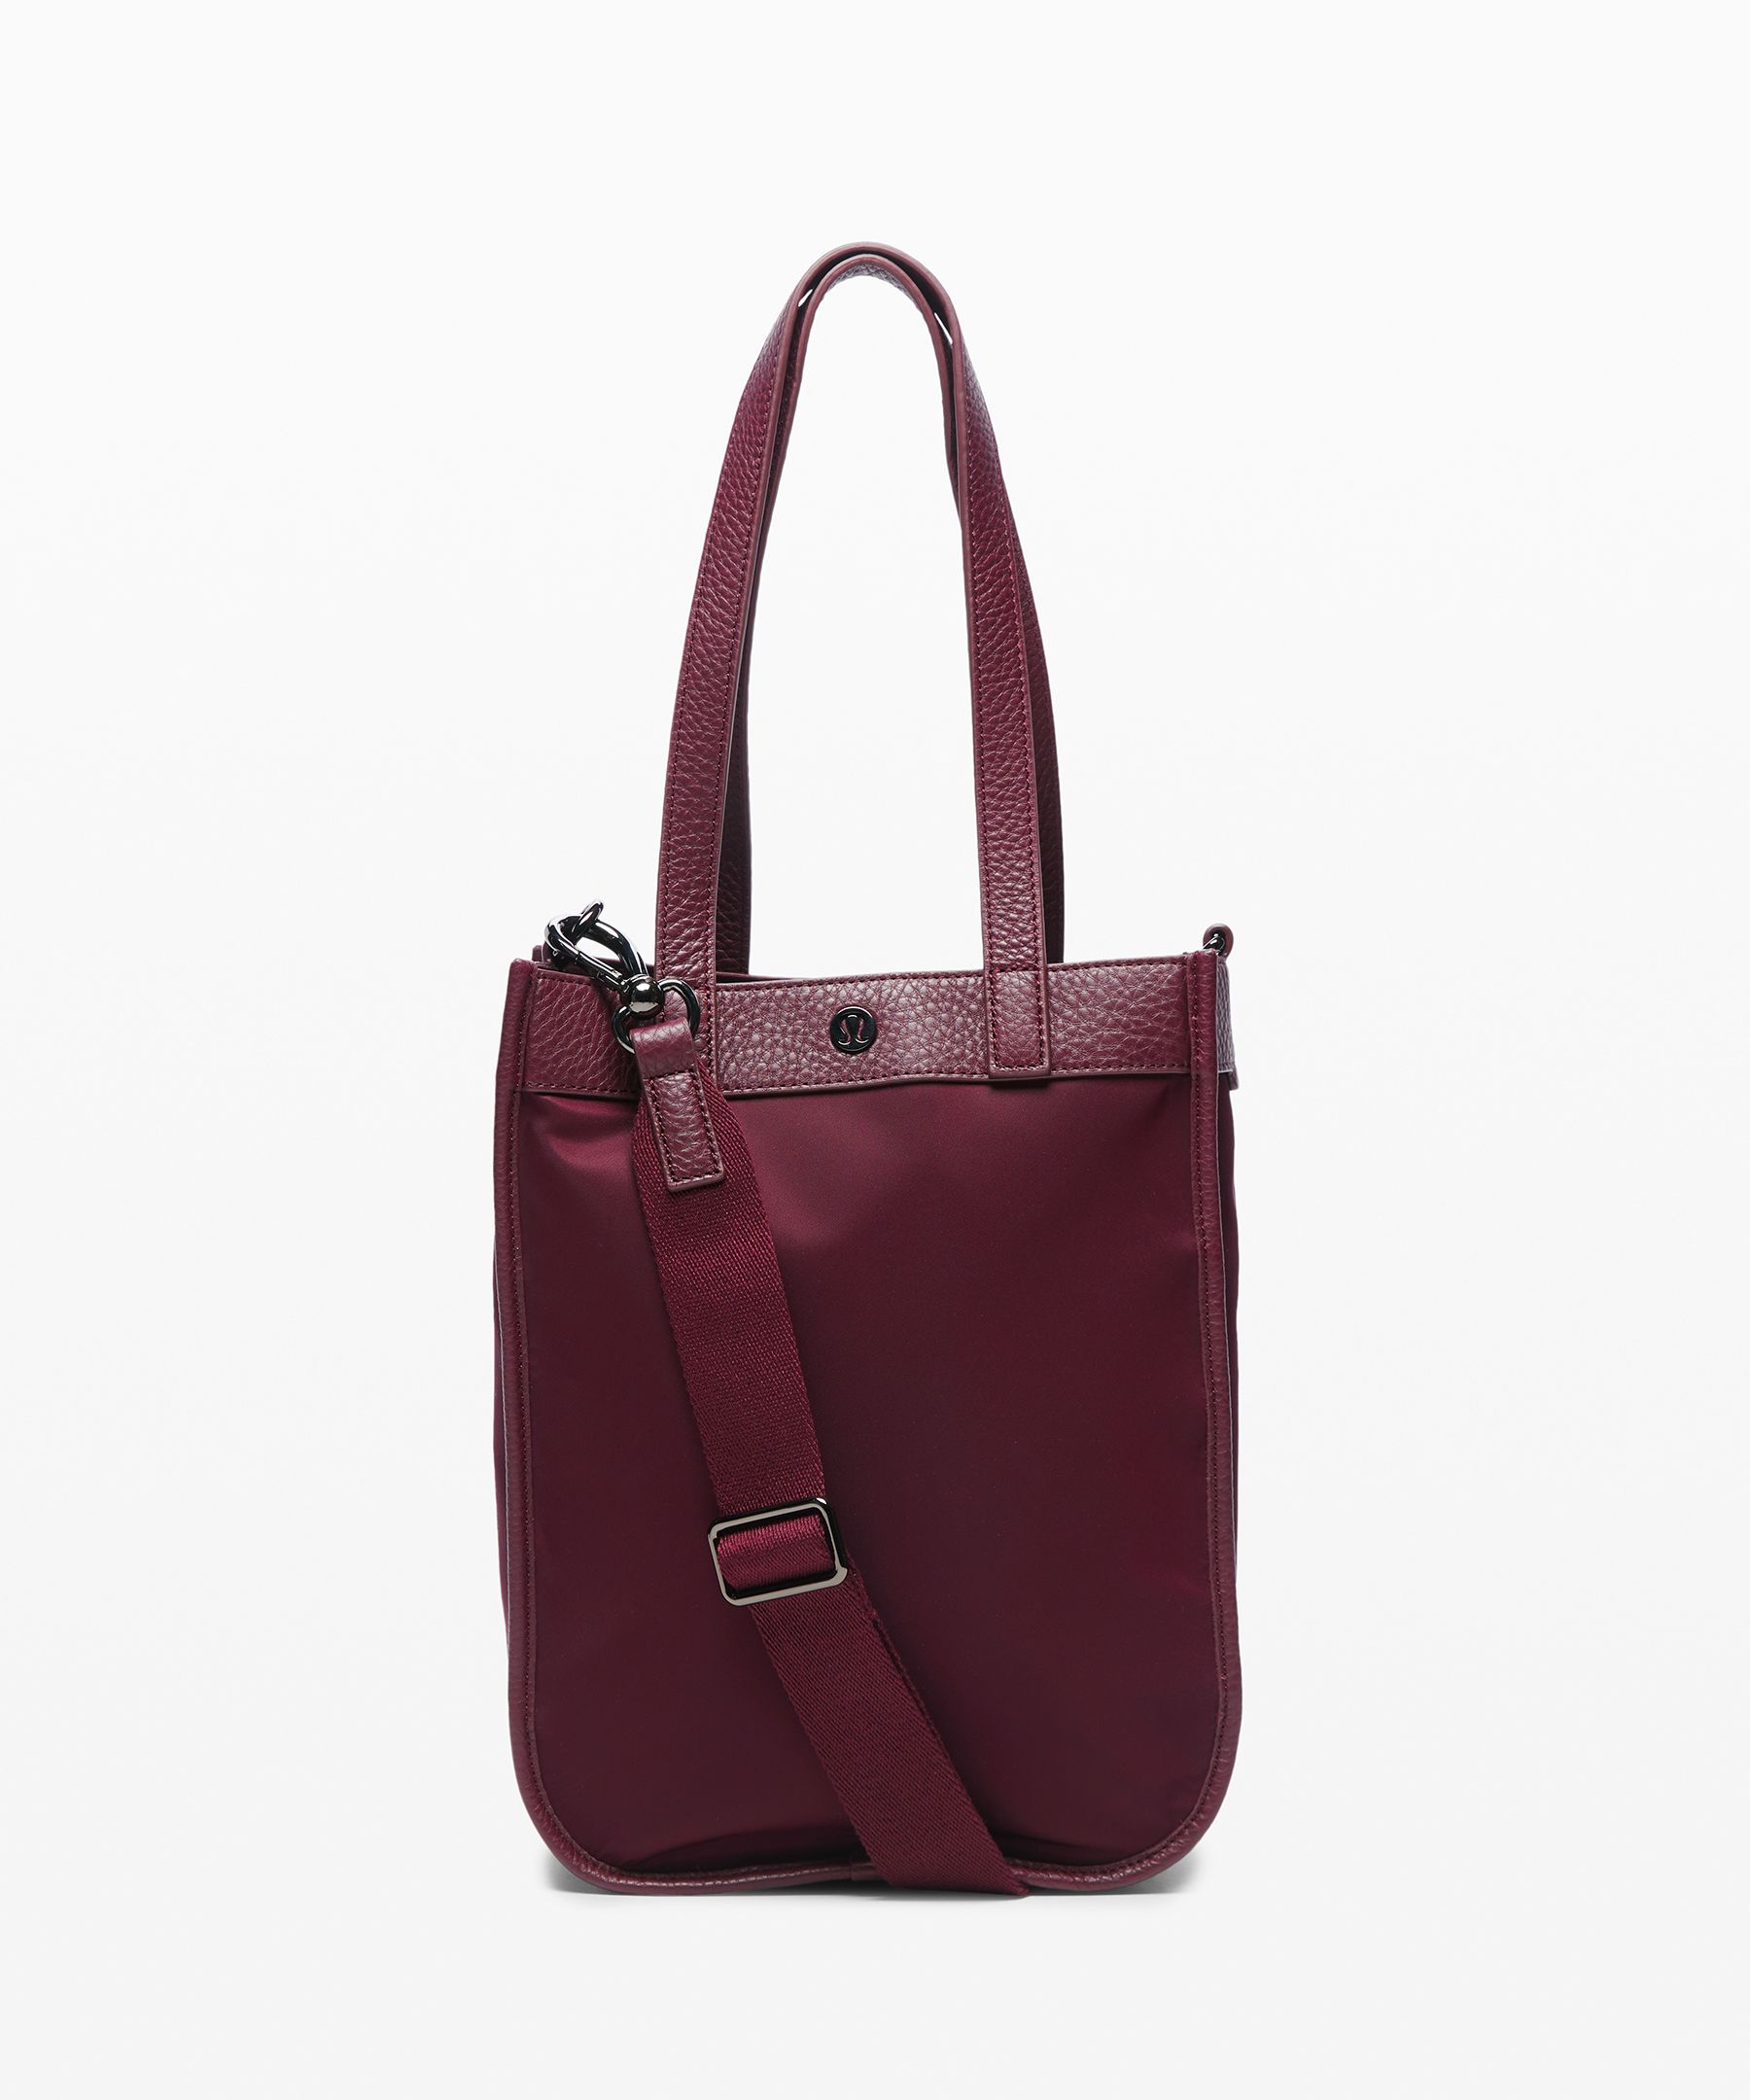 Lululemon Now And Always Tote Mini *8l In Burgundy